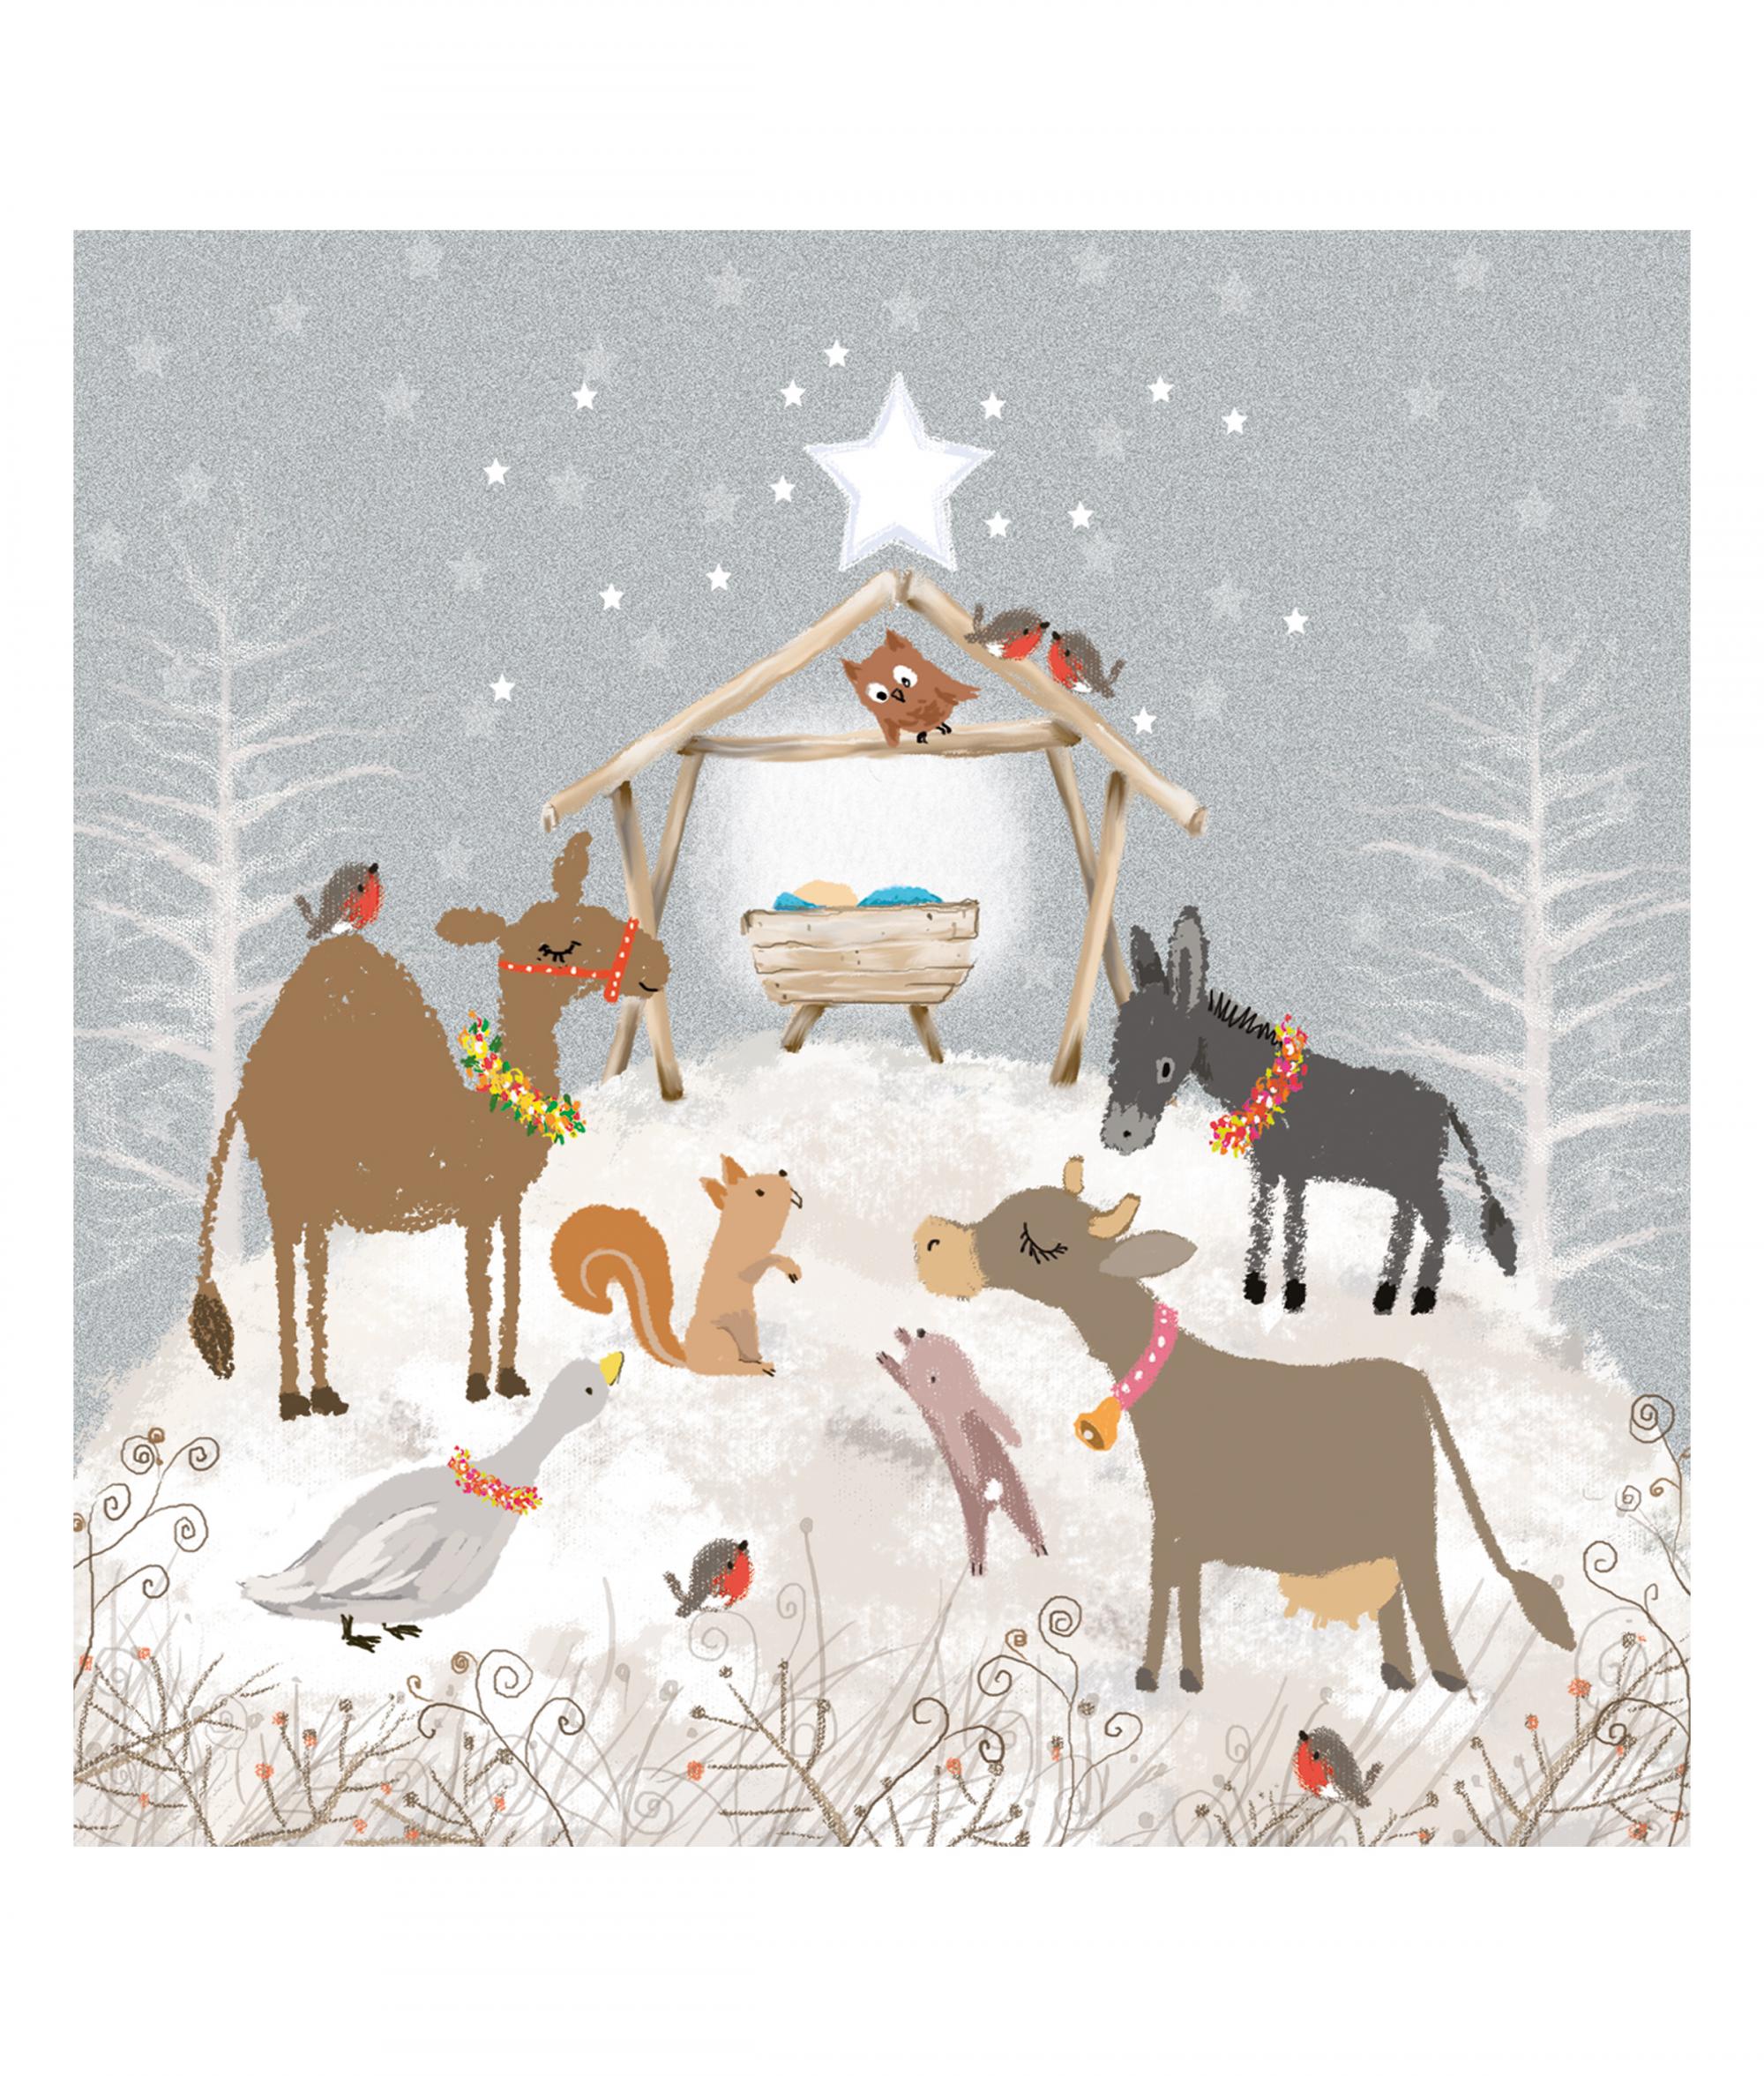 30 Cards 4 Designs UK Greetings Charity Christmas Card Multipack Perfect Send for Kids Cute Nativity Scene Cards 